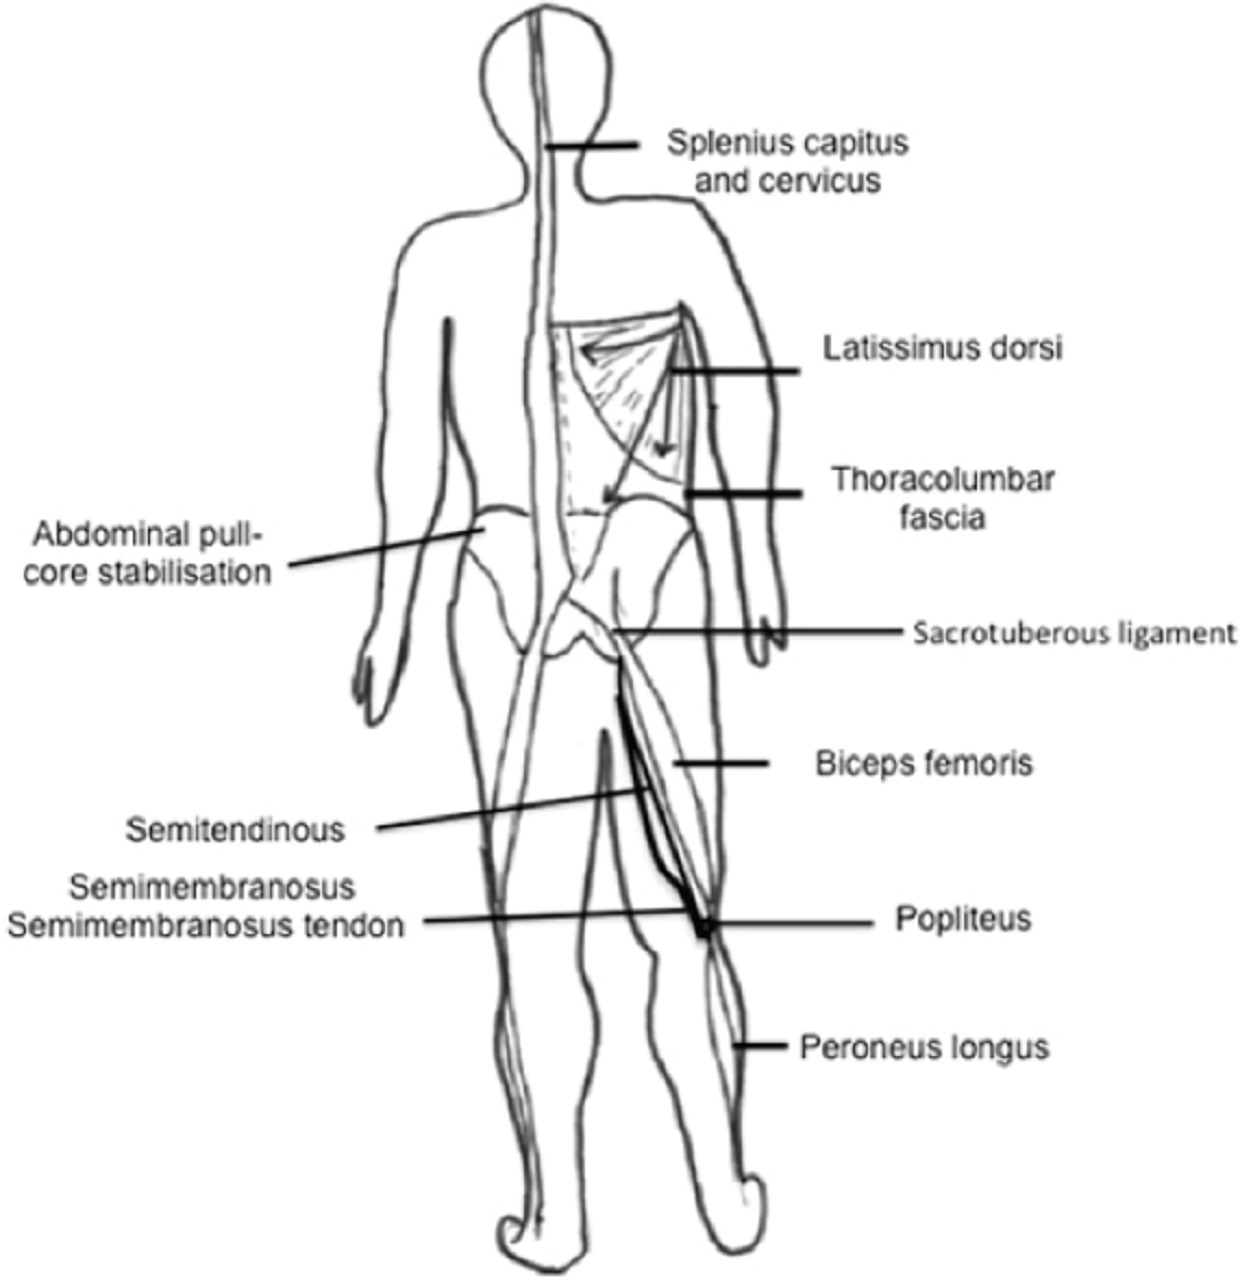 An outline of the human body with different parts pointing in the skull, upper torso, knee, ankle and foot